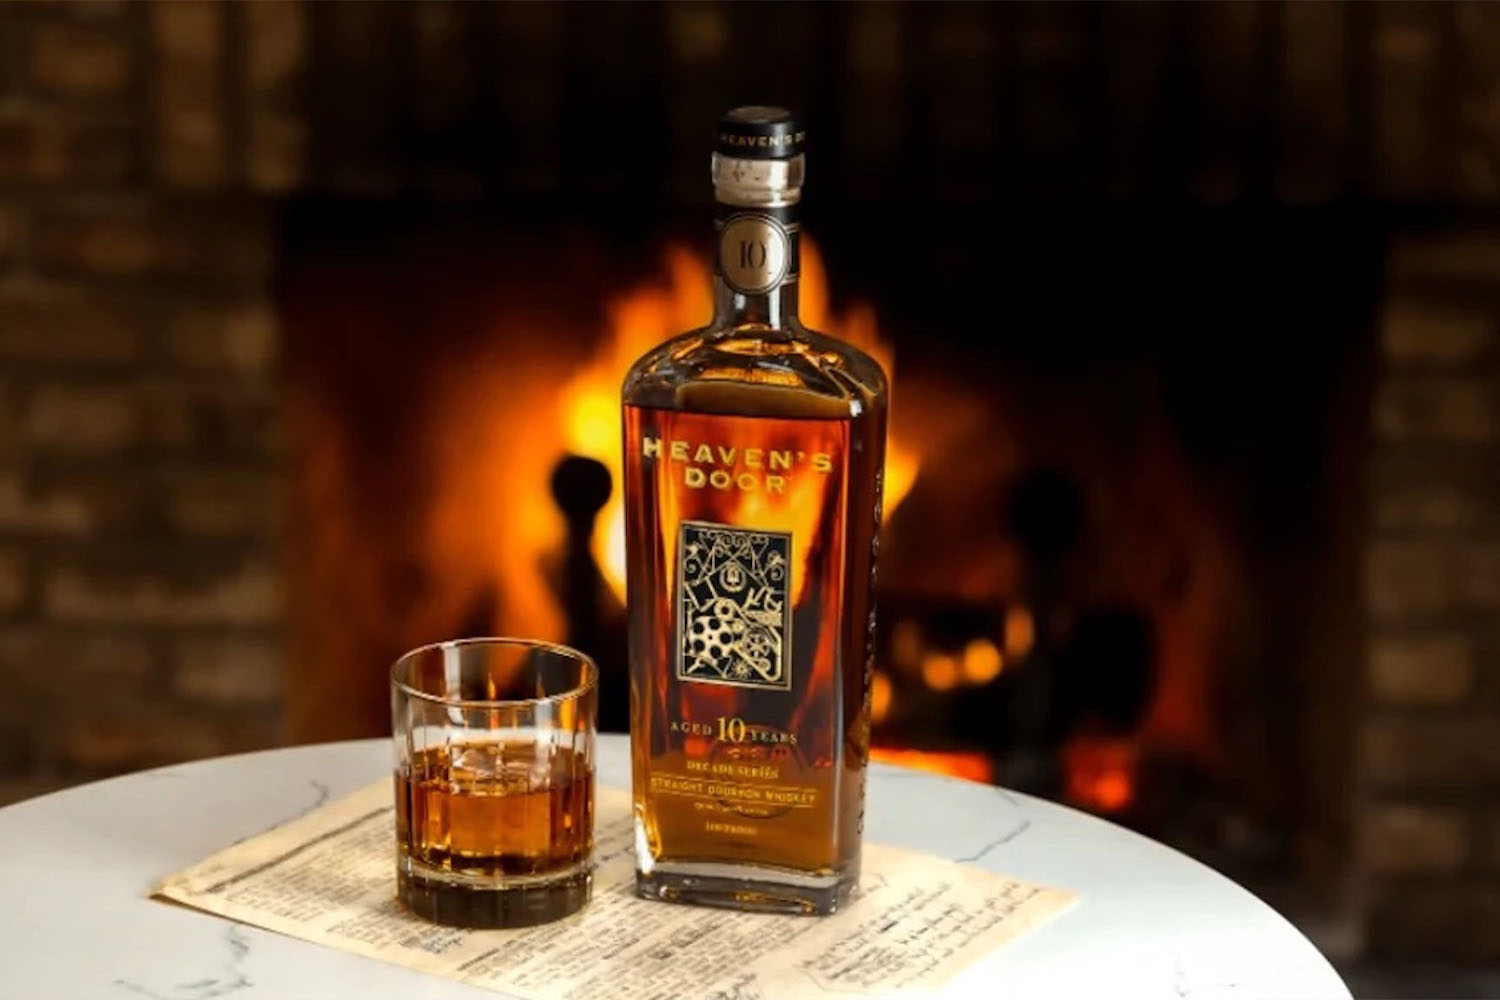 a bottle of Heaven's Door Bourbon and a glass in front of a fireplace